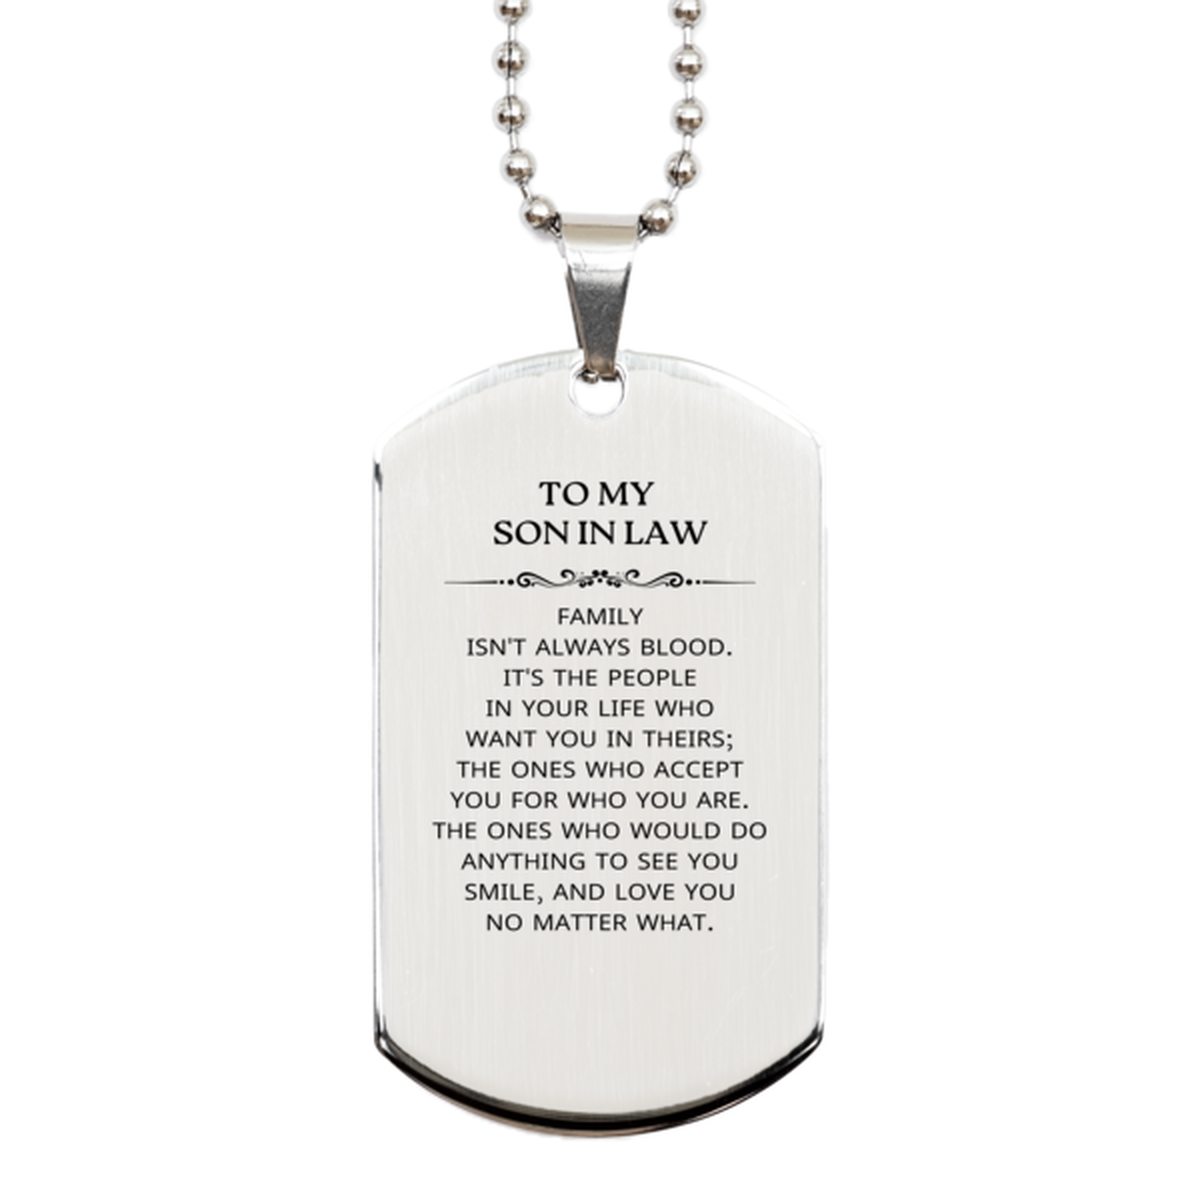 To My Son In Law Gifts, Family isn't always blood, Son In Law Silver Dog Tag, Birthday Christmas Unique Present For Son In Law